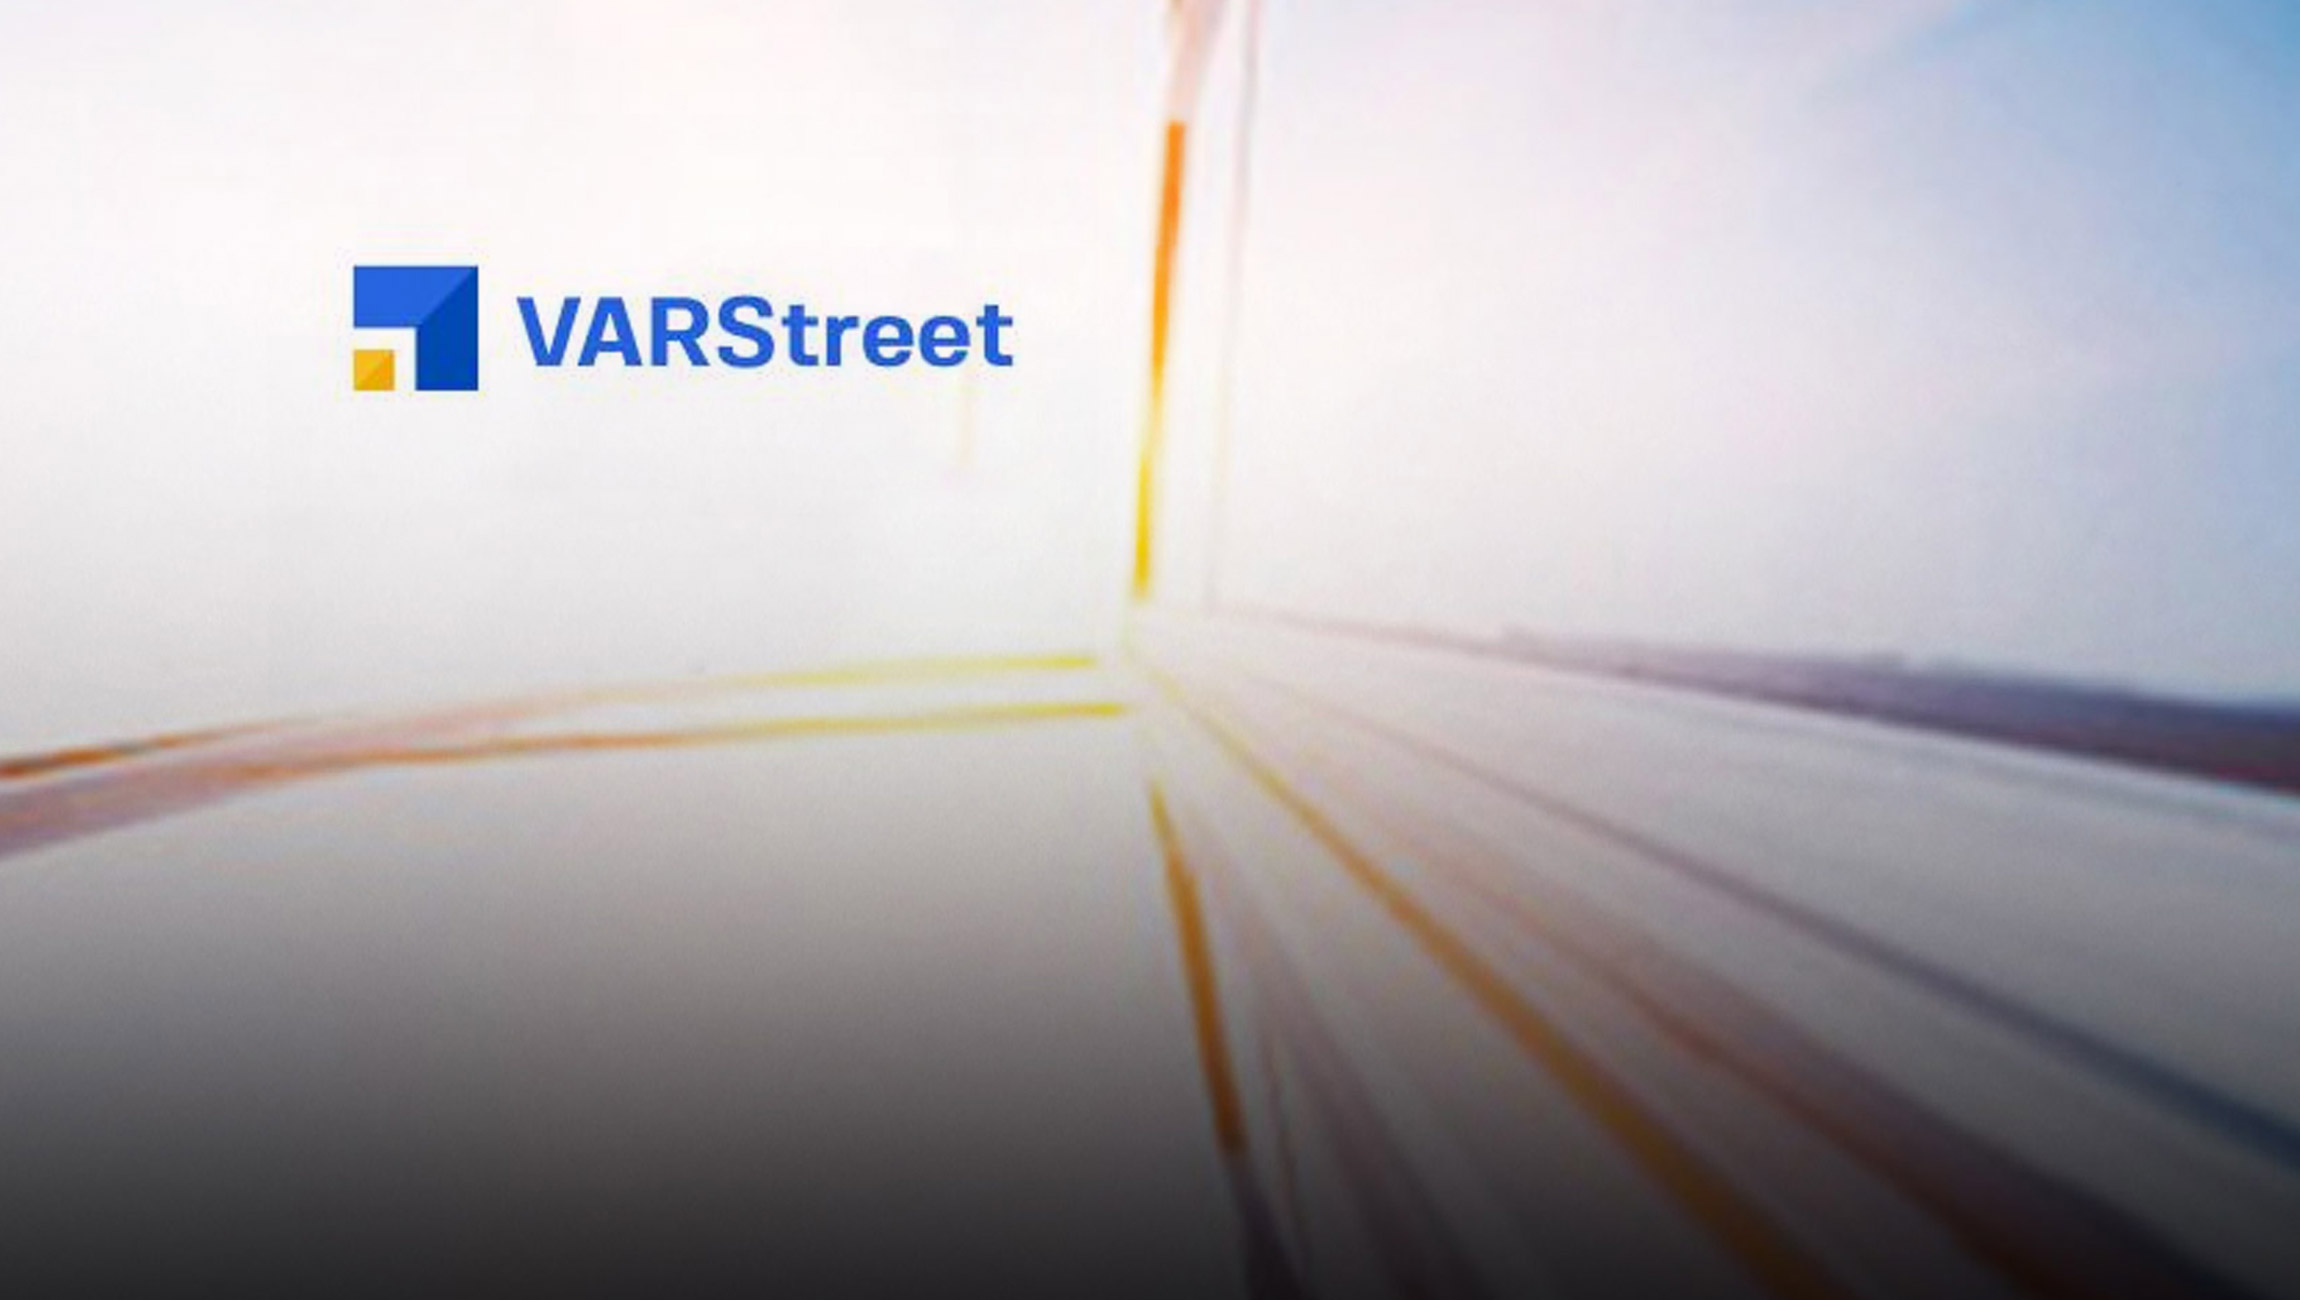 VARStreet-Inc.-announces-the-integration-of-Enhanced-eCommerce-by-Google-Analytics-for-their-B2B-eCommerce-stores